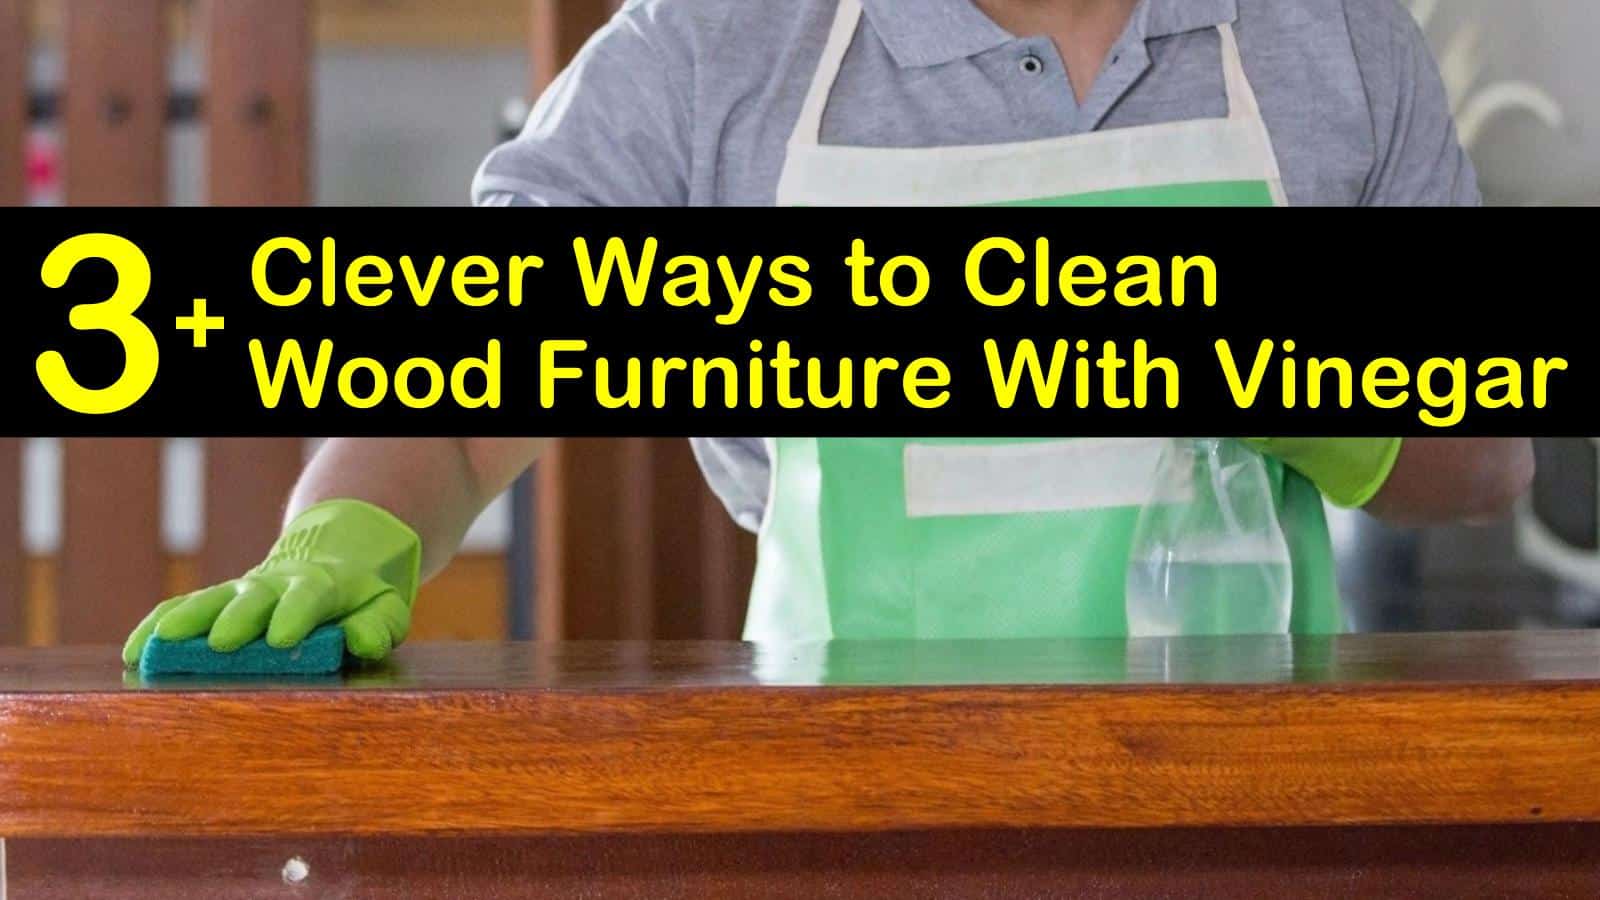 Clean Wood Furniture With Vinegar, Is It Safe To Use Vinegar On Wood Cabinets